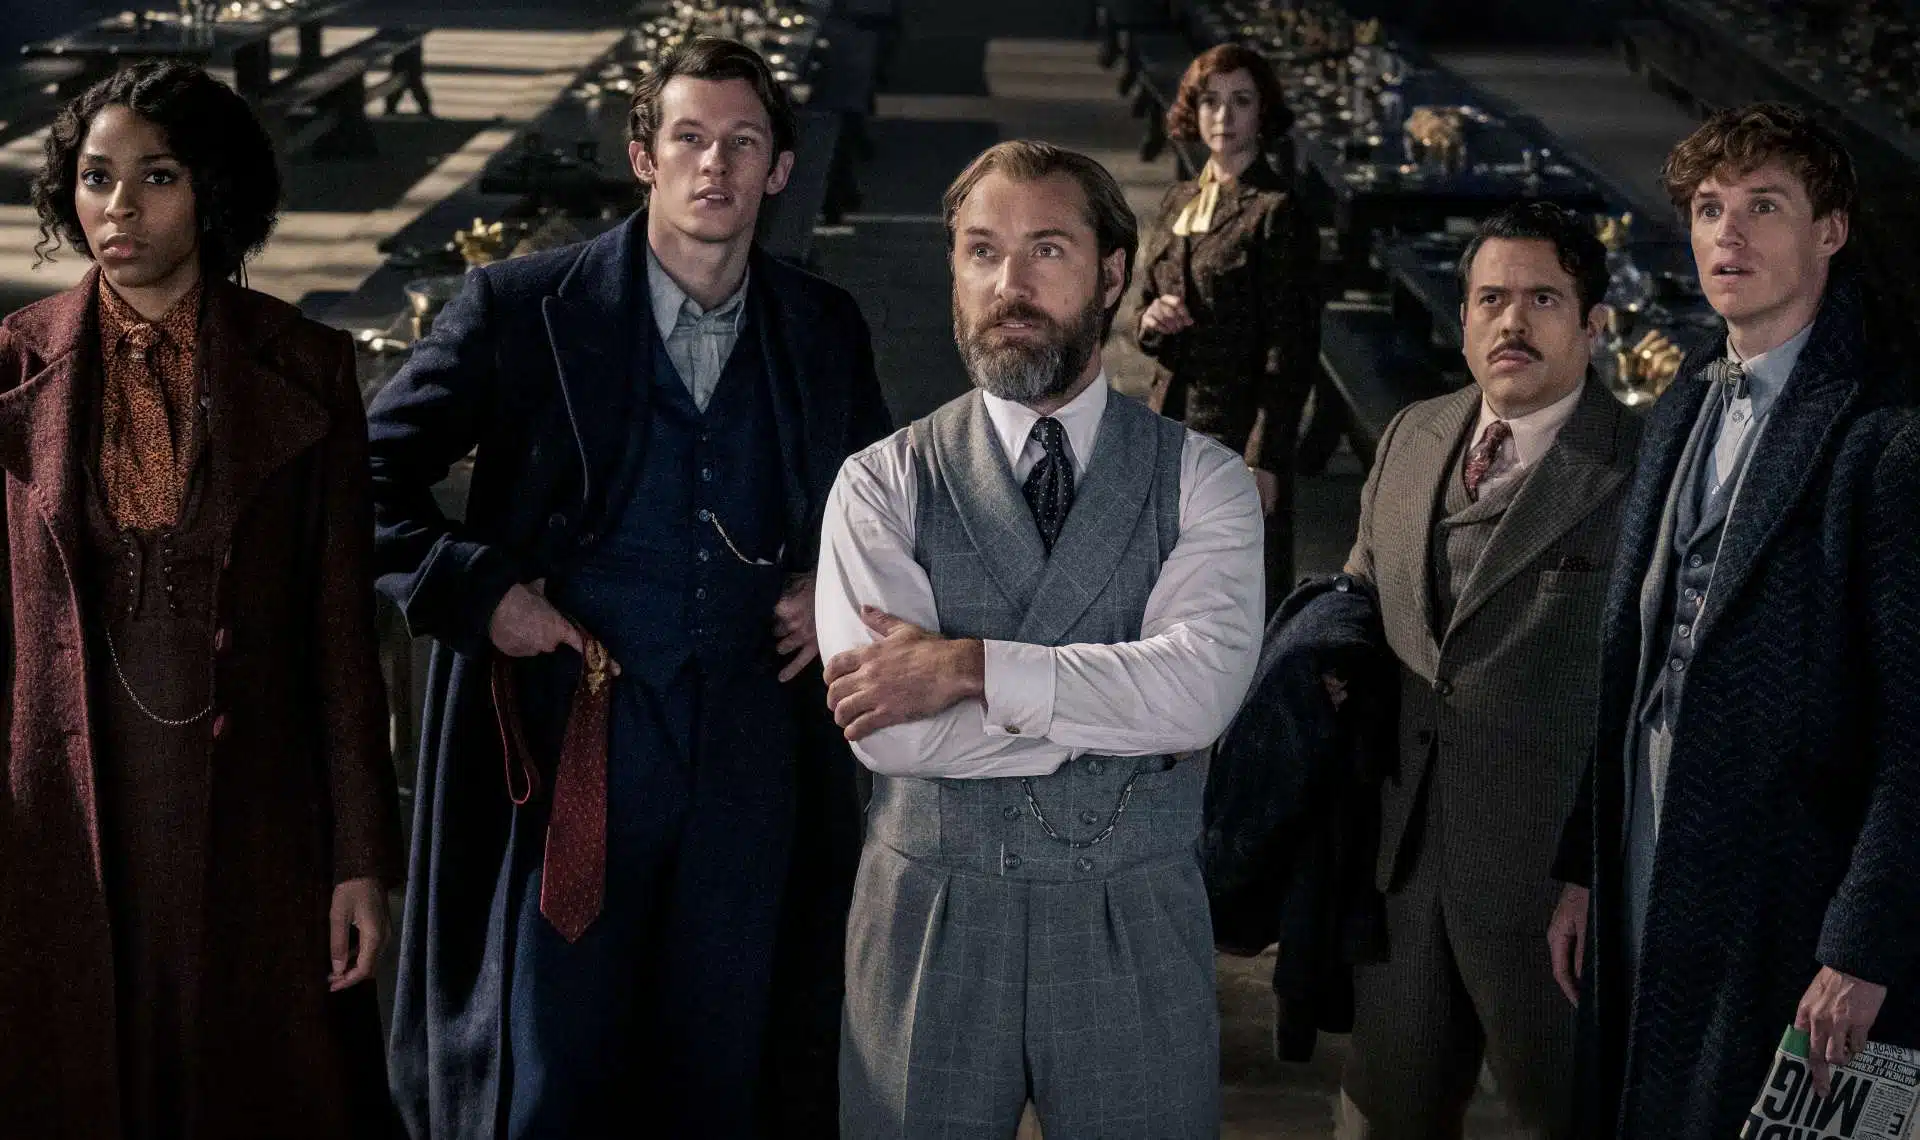 Fantastic Beasts The Secrets of Dumbledore is chaotic fun but mostly chaos